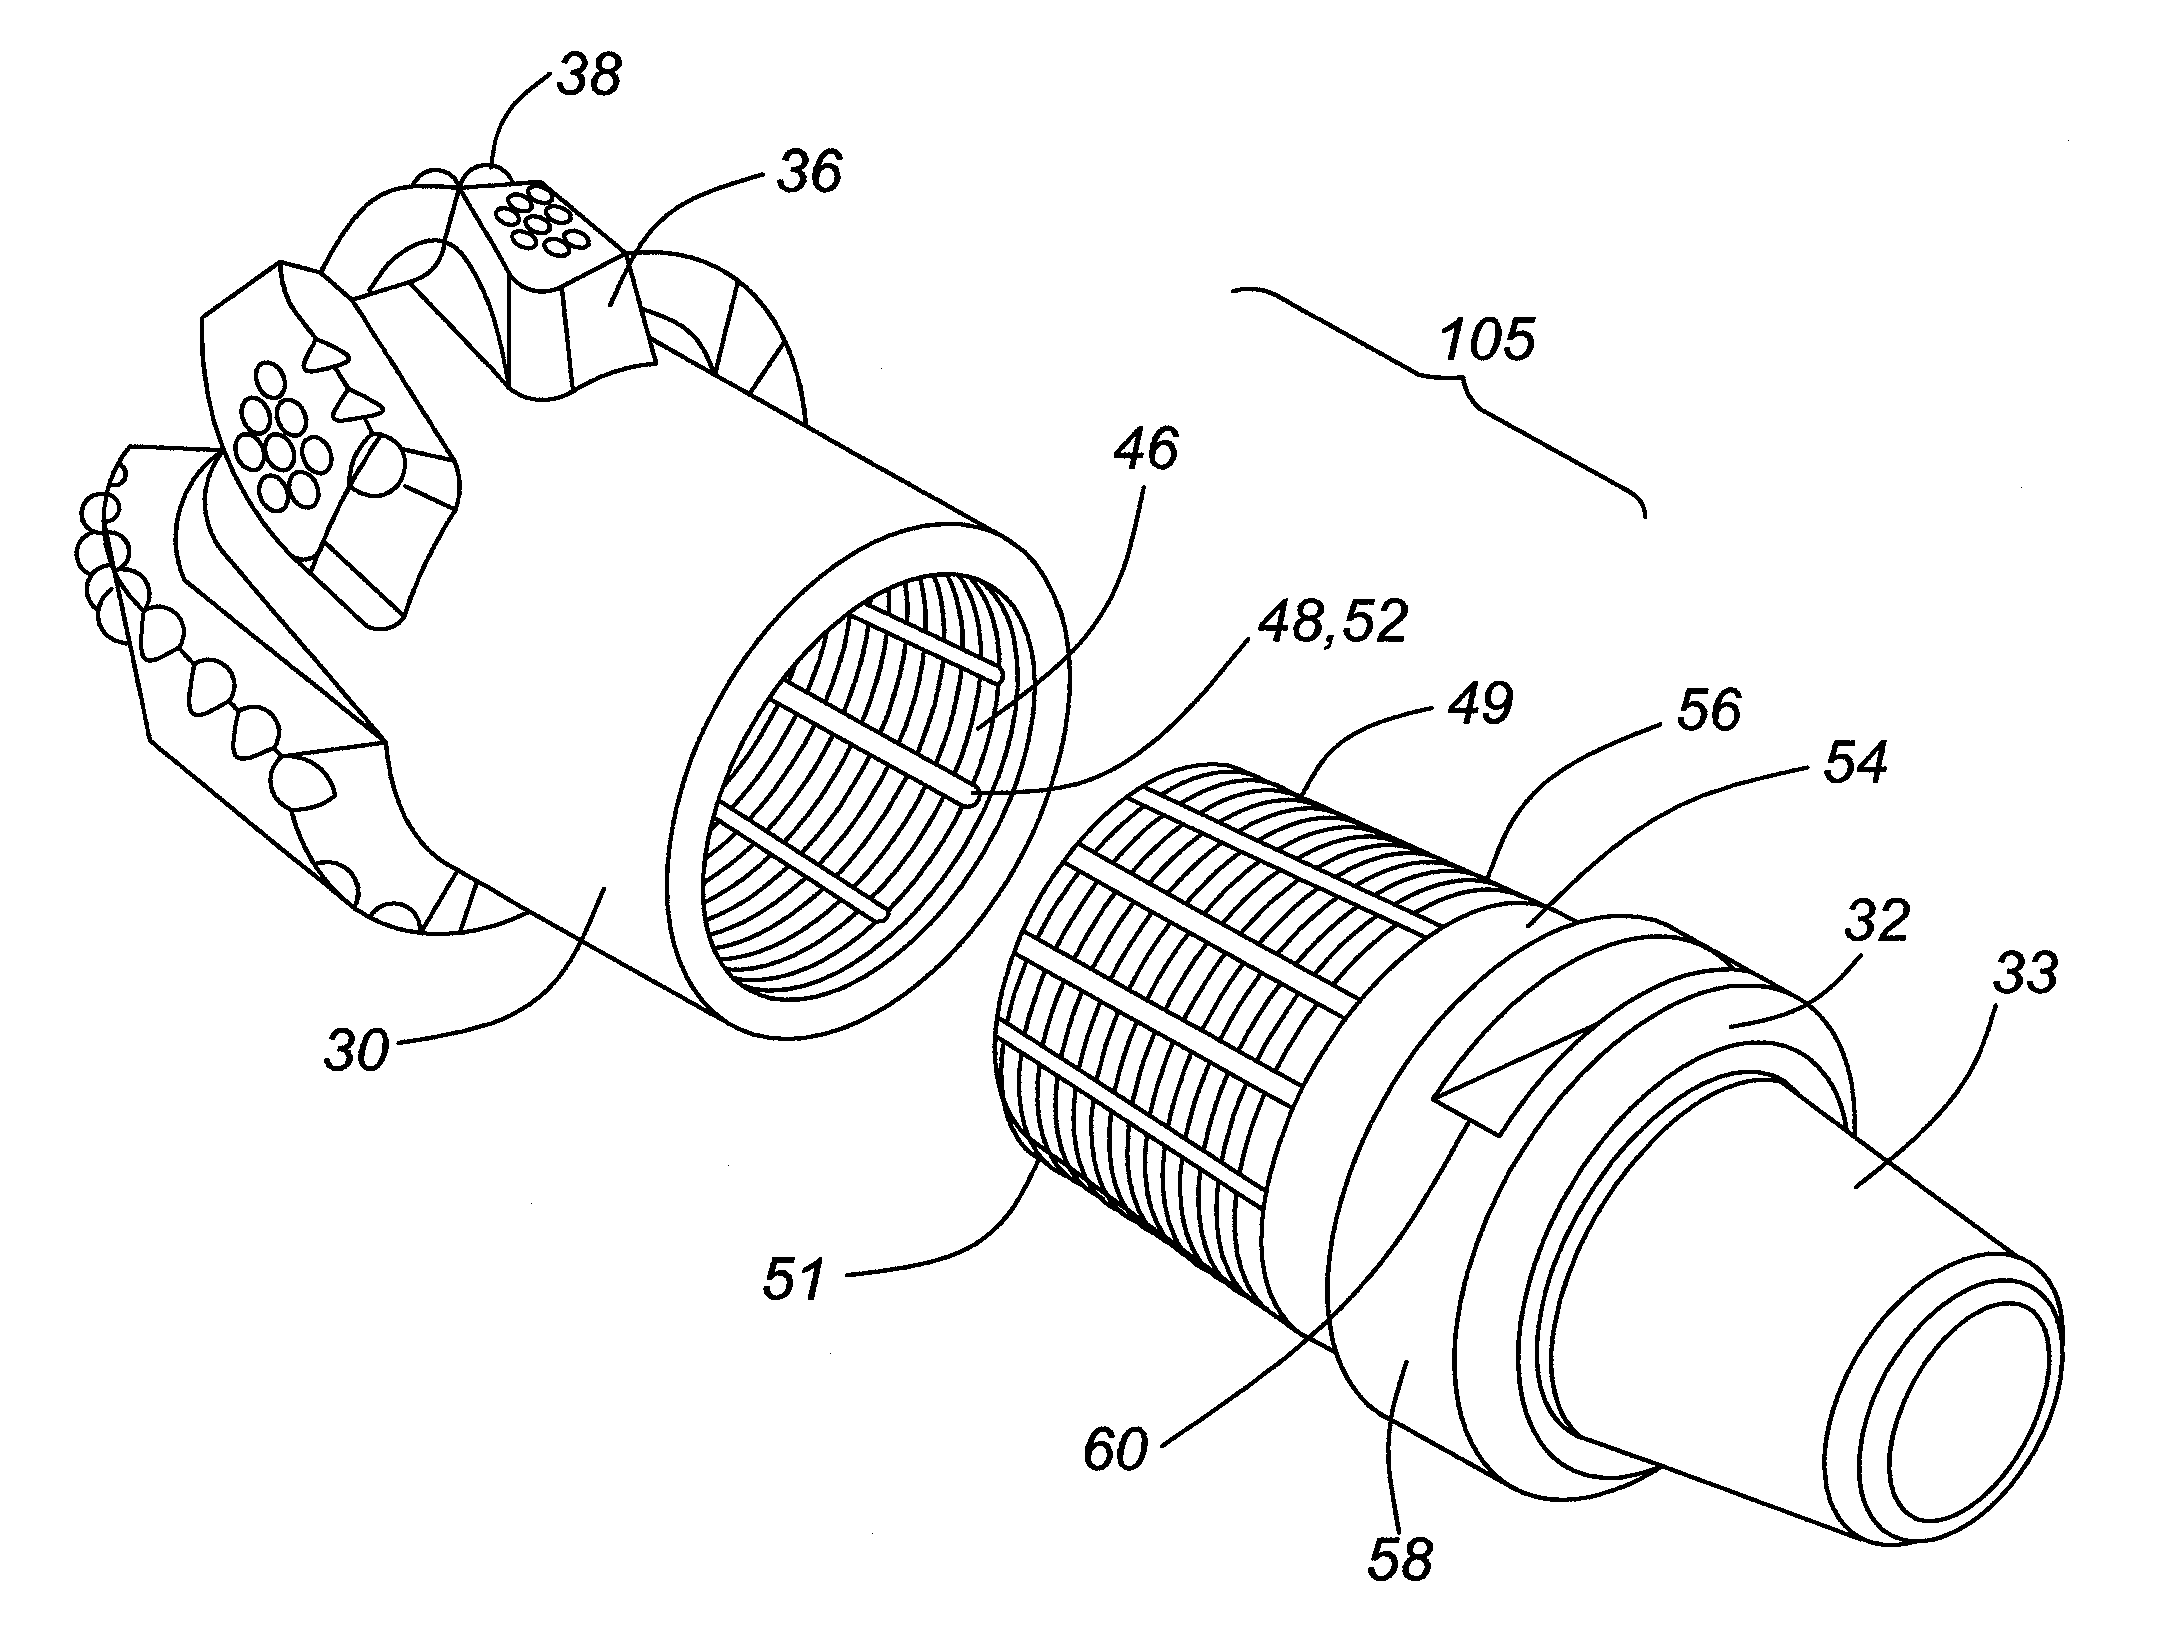 Drill bit assembly having electrically isolated gap joint for electromagnetic telemetry